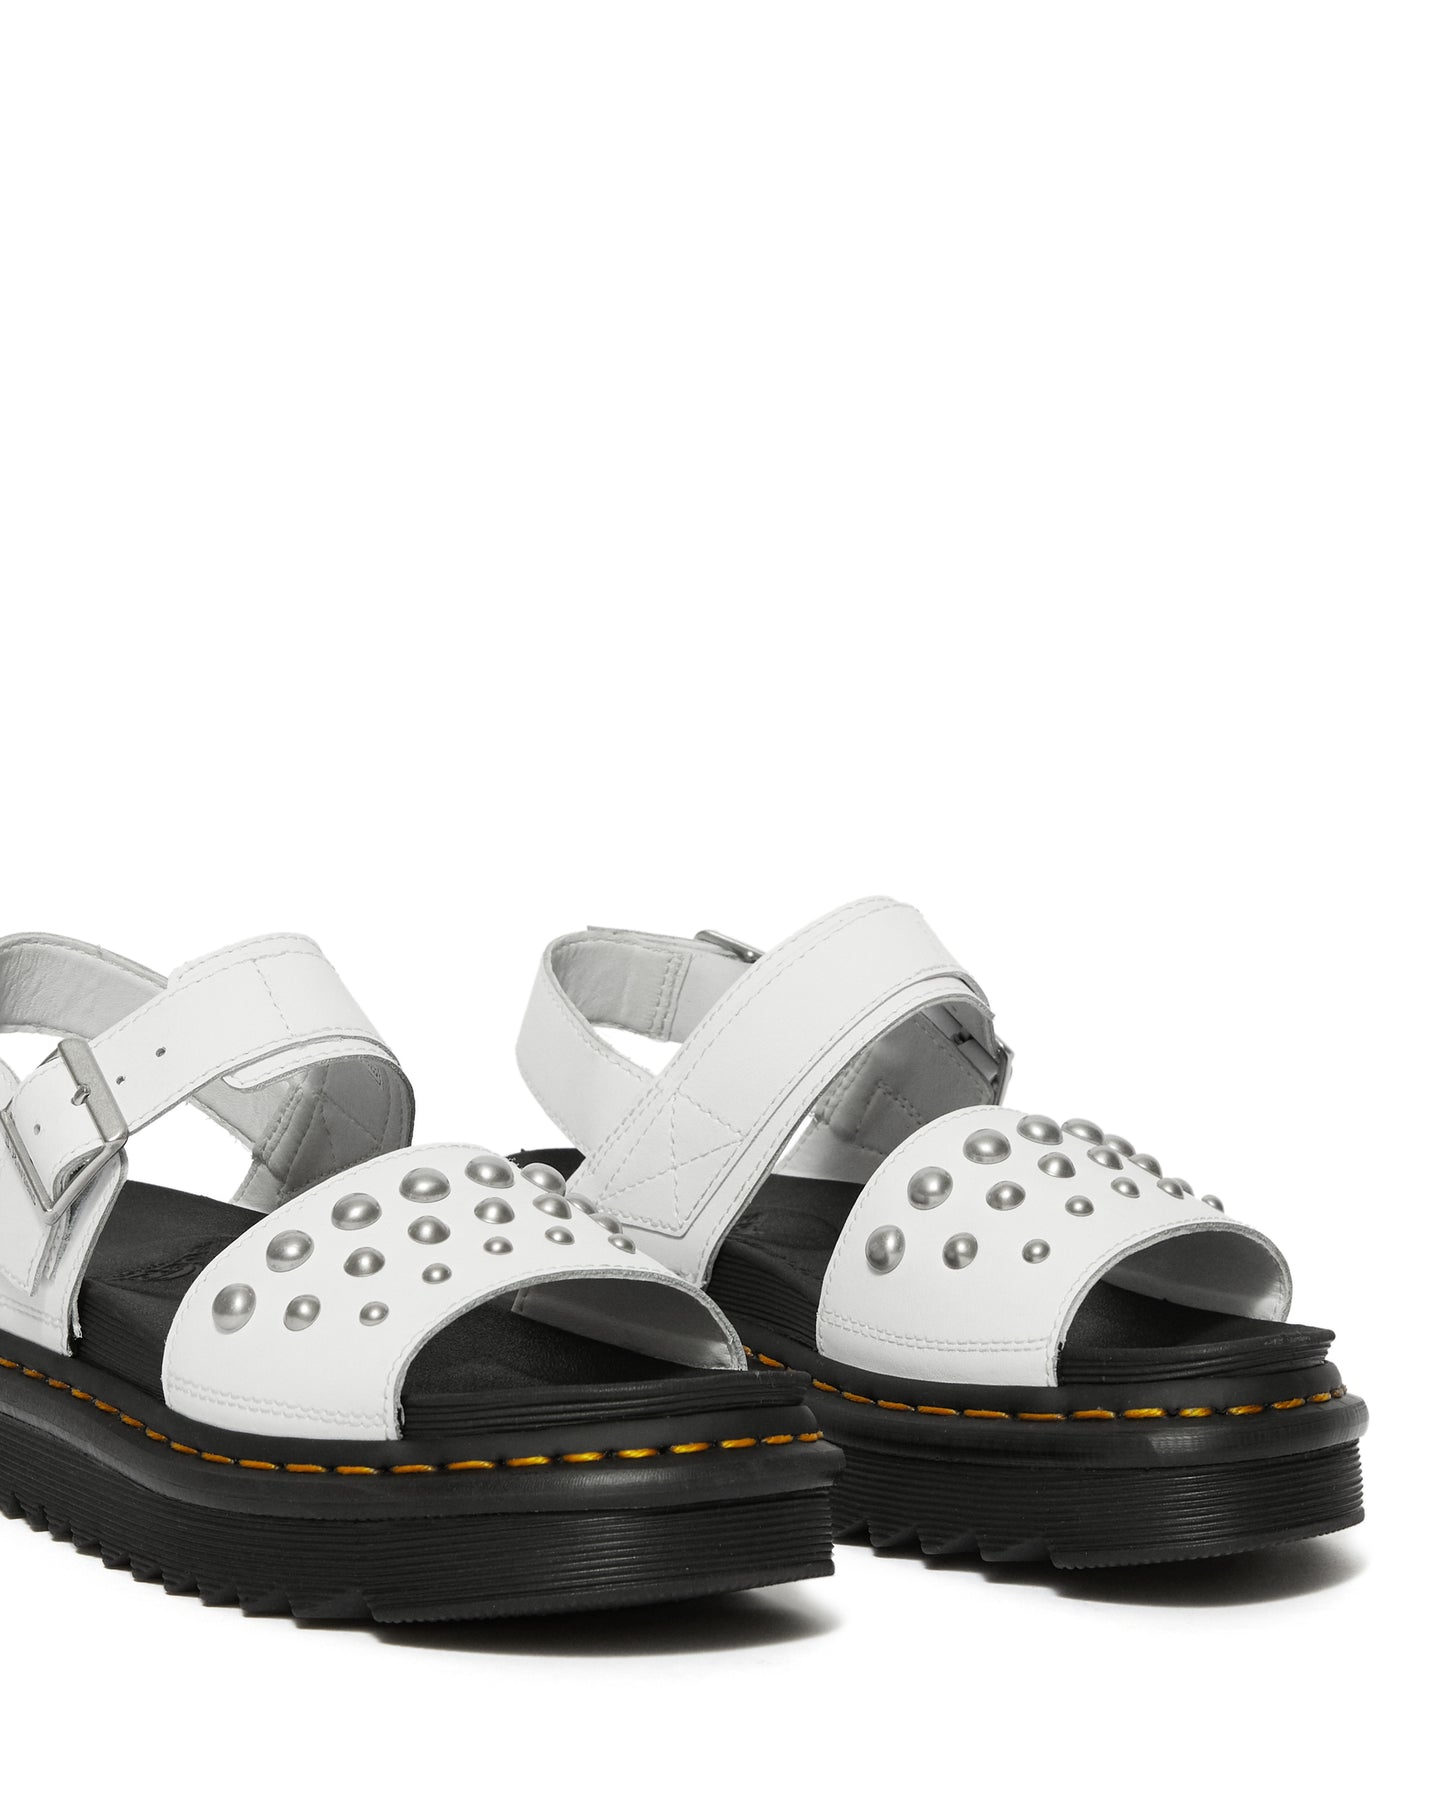 VOSS LEATHER STUDDED SANDALS